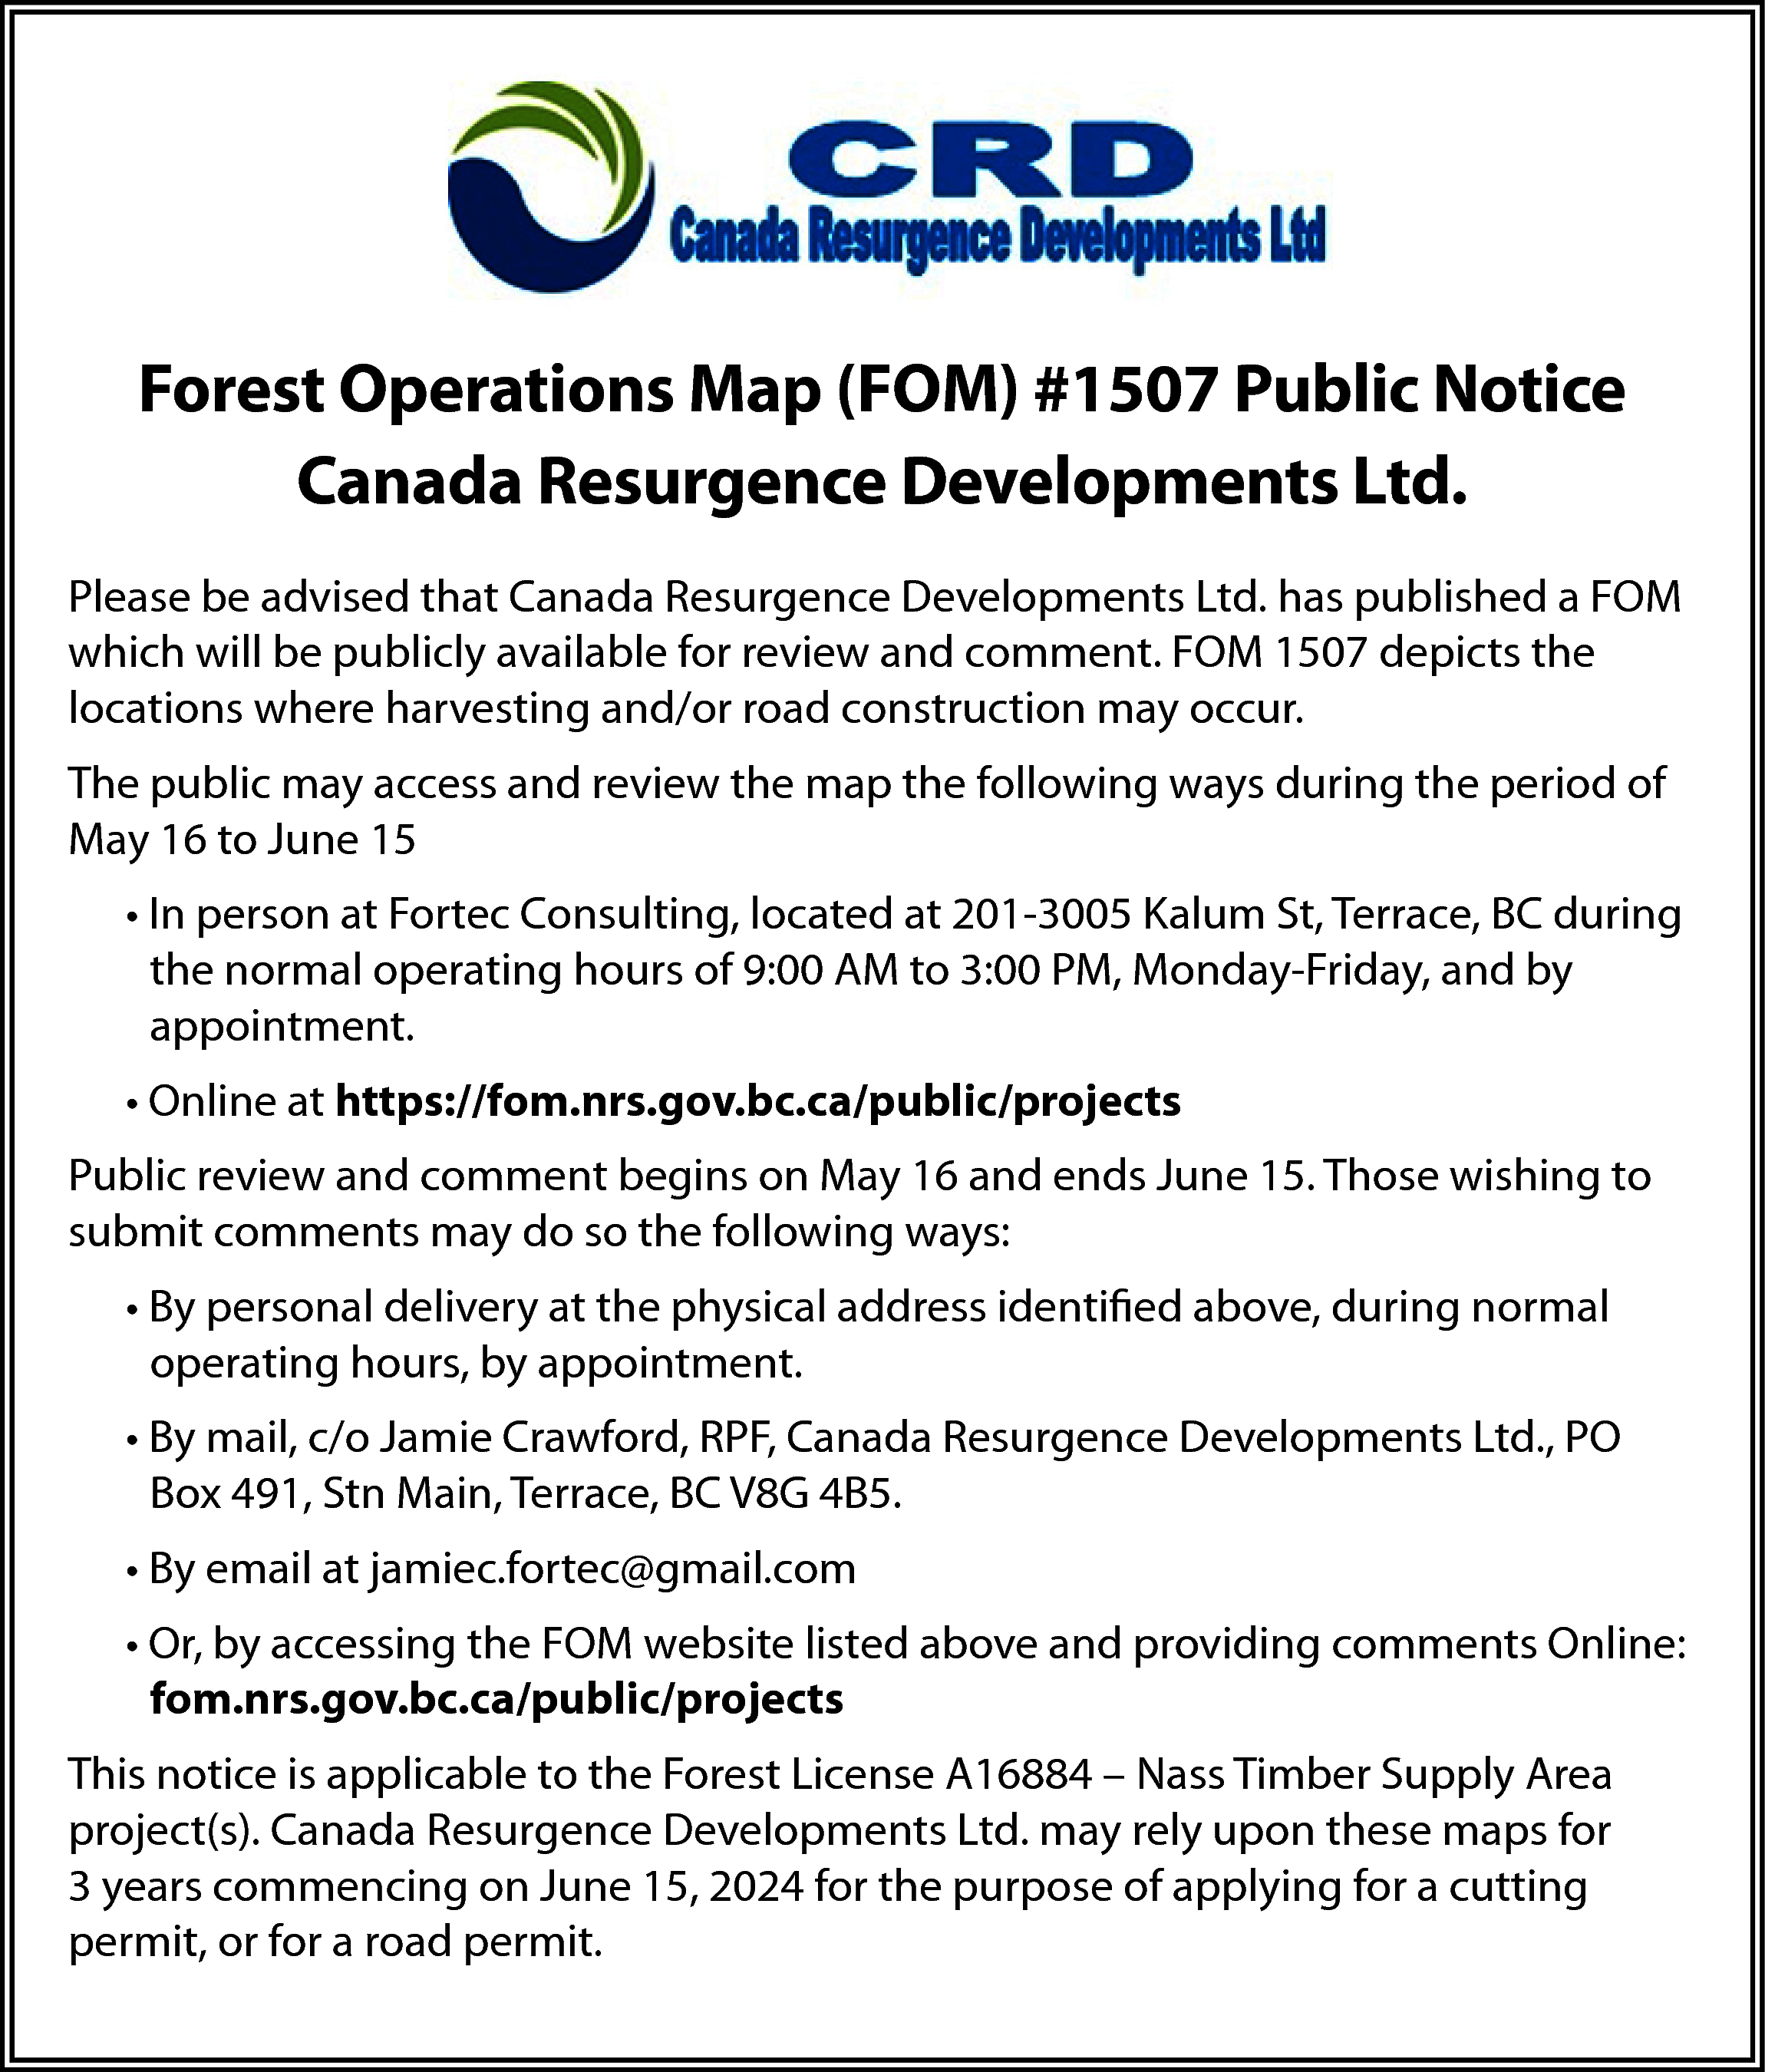 Forest Operations Map (FOM) #1507  Forest Operations Map (FOM) #1507 Public Notice  Canada Resurgence Developments Ltd.  Please be advised that Canada Resurgence Developments Ltd. has published a FOM  which will be publicly available for review and comment. FOM 1507 depicts the  locations where harvesting and/or road construction may occur.  The public may access and review the map the following ways during the period of  May 16 to June 15  • In person at Fortec Consulting, located at 201-3005 Kalum St, Terrace, BC during  the normal operating hours of 9:00 AM to 3:00 PM, Monday-Friday, and by  appointment.  • Online at https://fom.nrs.gov.bc.ca/public/projects  Public review and comment begins on May 16 and ends June 15. Those wishing to  submit comments may do so the following ways:  • By personal delivery at the physical address identified above, during normal  operating hours, by appointment.  • By mail, c/o Jamie Crawford, RPF, Canada Resurgence Developments Ltd., PO  Box 491, Stn Main, Terrace, BC V8G 4B5.  • By email at jamiec.fortec@gmail.com  • Or, by accessing the FOM website listed above and providing comments Online:  fom.nrs.gov.bc.ca/public/projects  This notice is applicable to the Forest License A16884 – Nass Timber Supply Area  project(s). Canada Resurgence Developments Ltd. may rely upon these maps for  3 years commencing on June 15, 2024 for the purpose of applying for a cutting  permit, or for a road permit.    